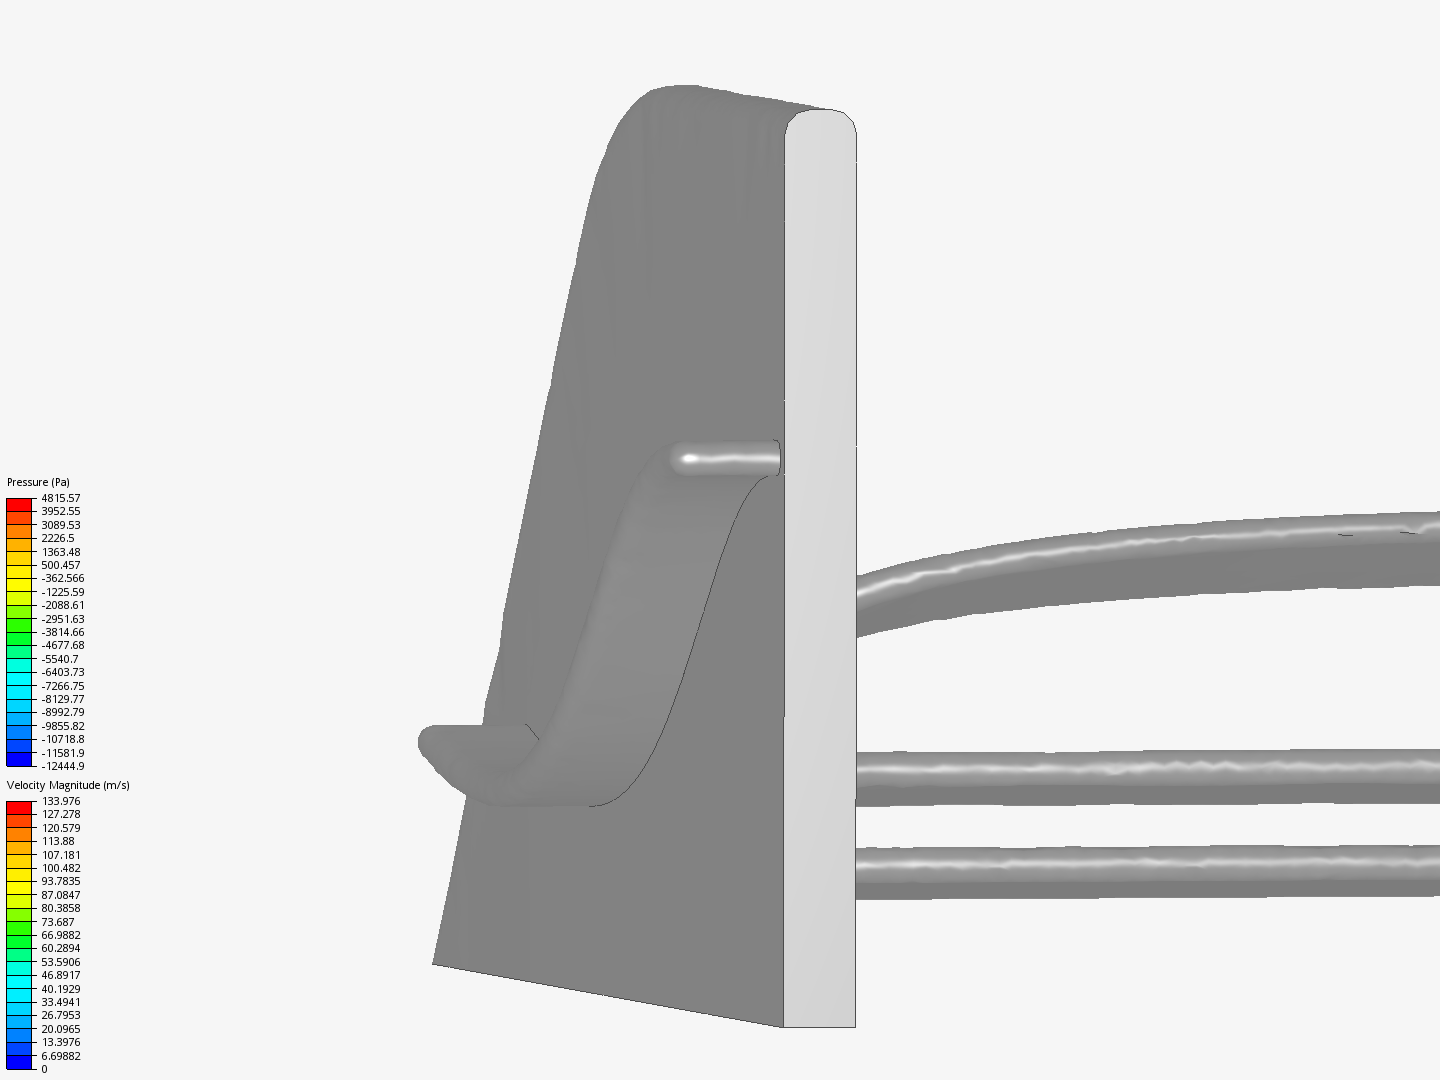 front wing image